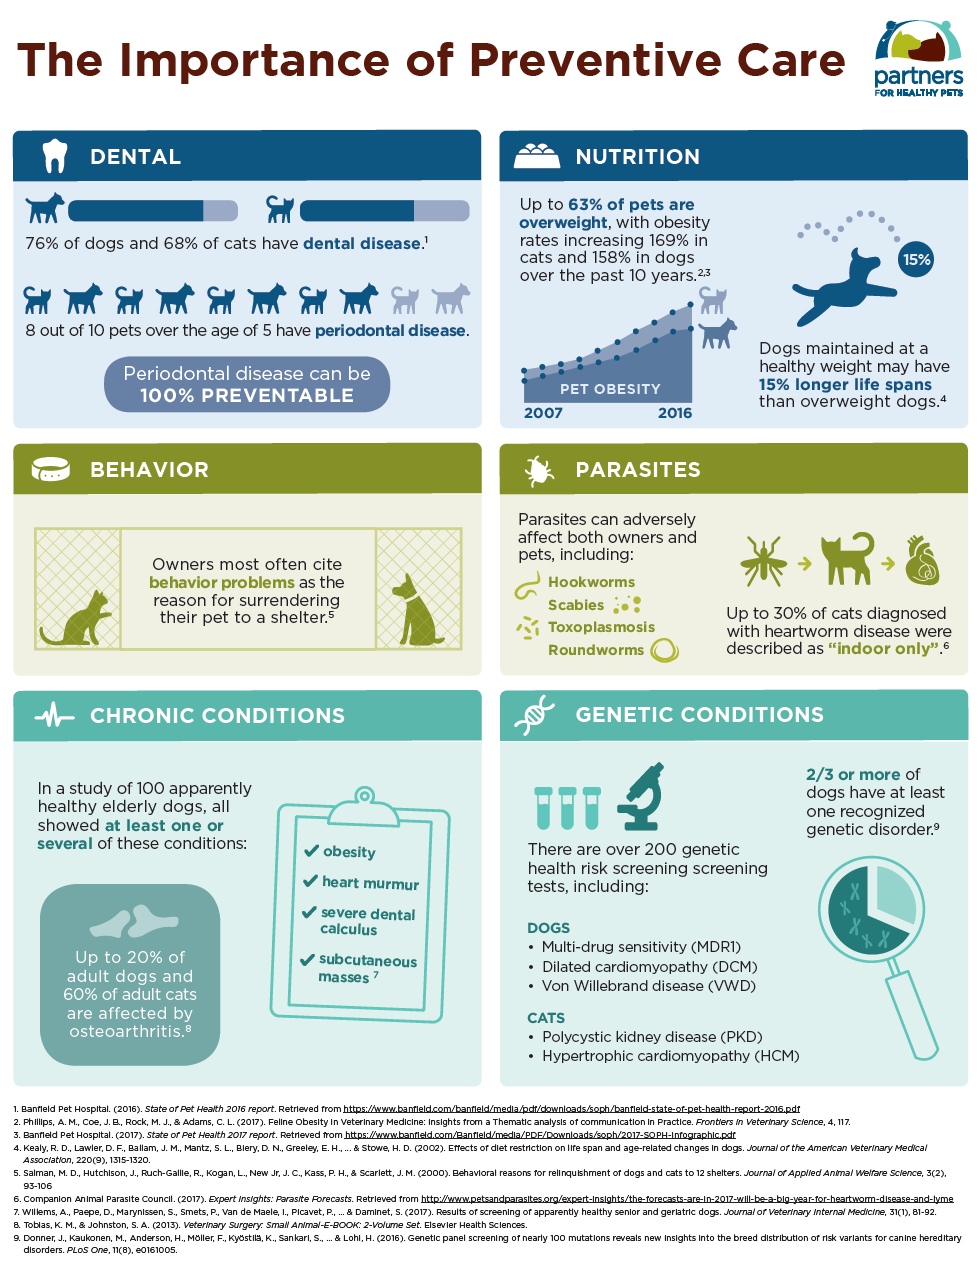 Link to the Preventive Care Infographic